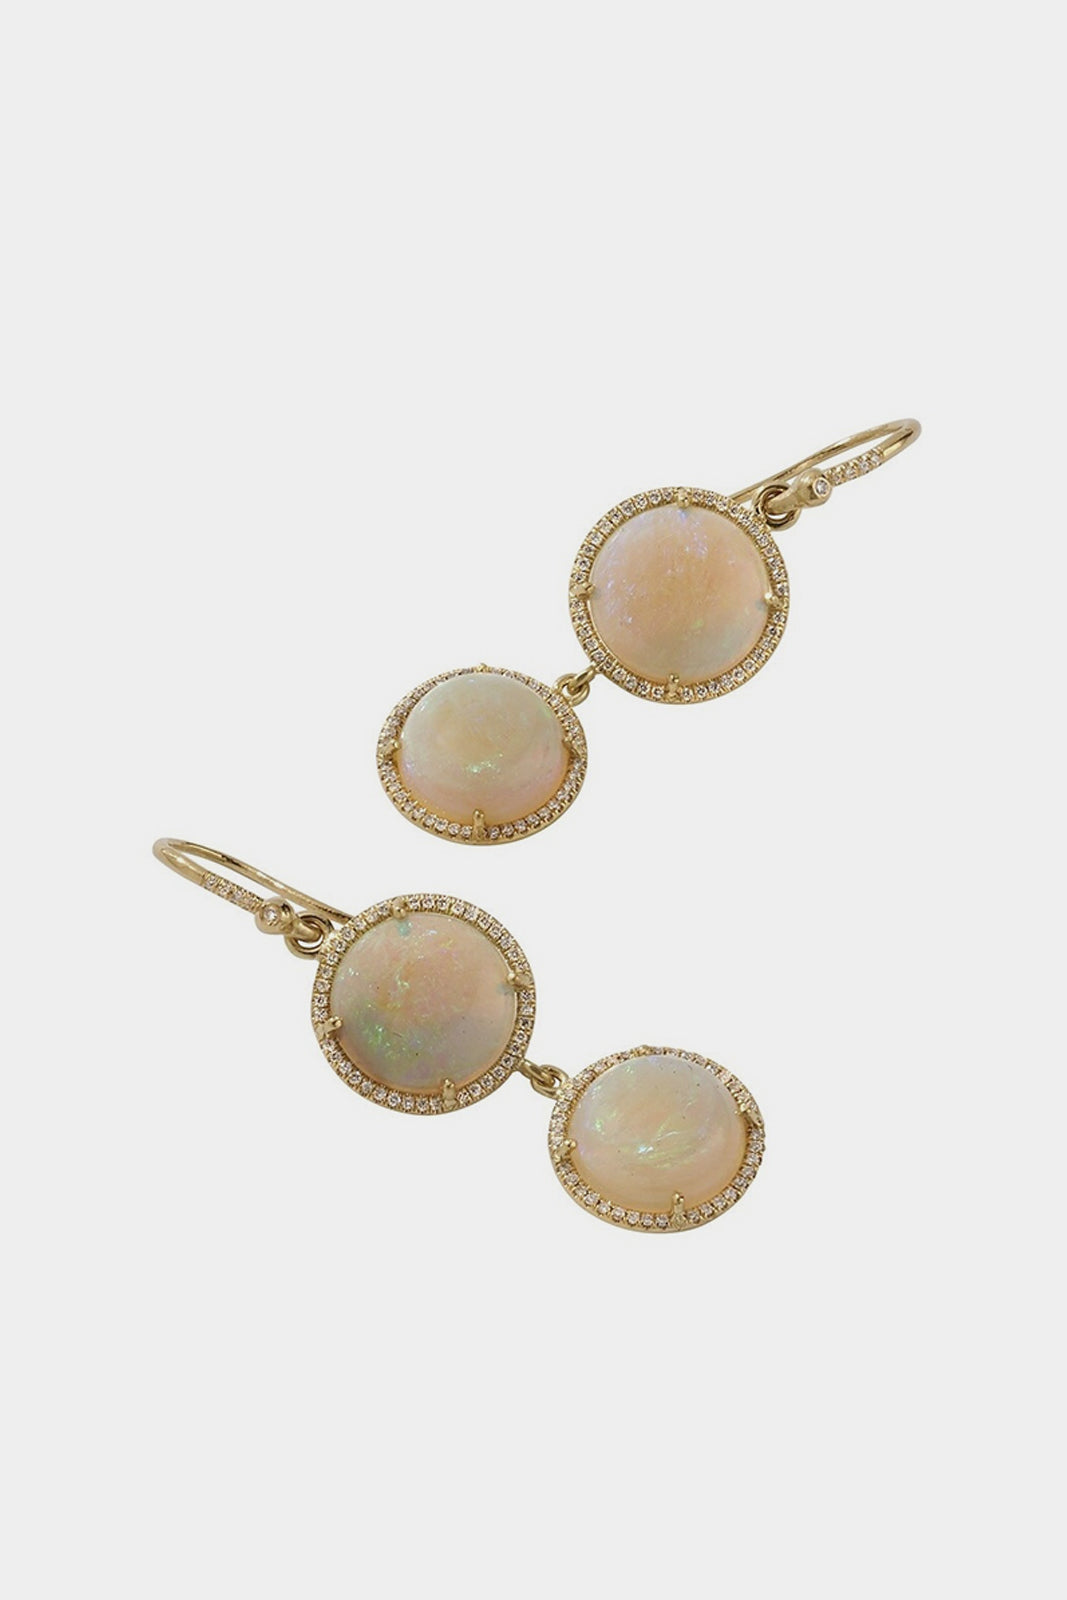 18K Yellow and White Gold Earrings Set with Opal and Diamond Pavé on Pavé Hooks